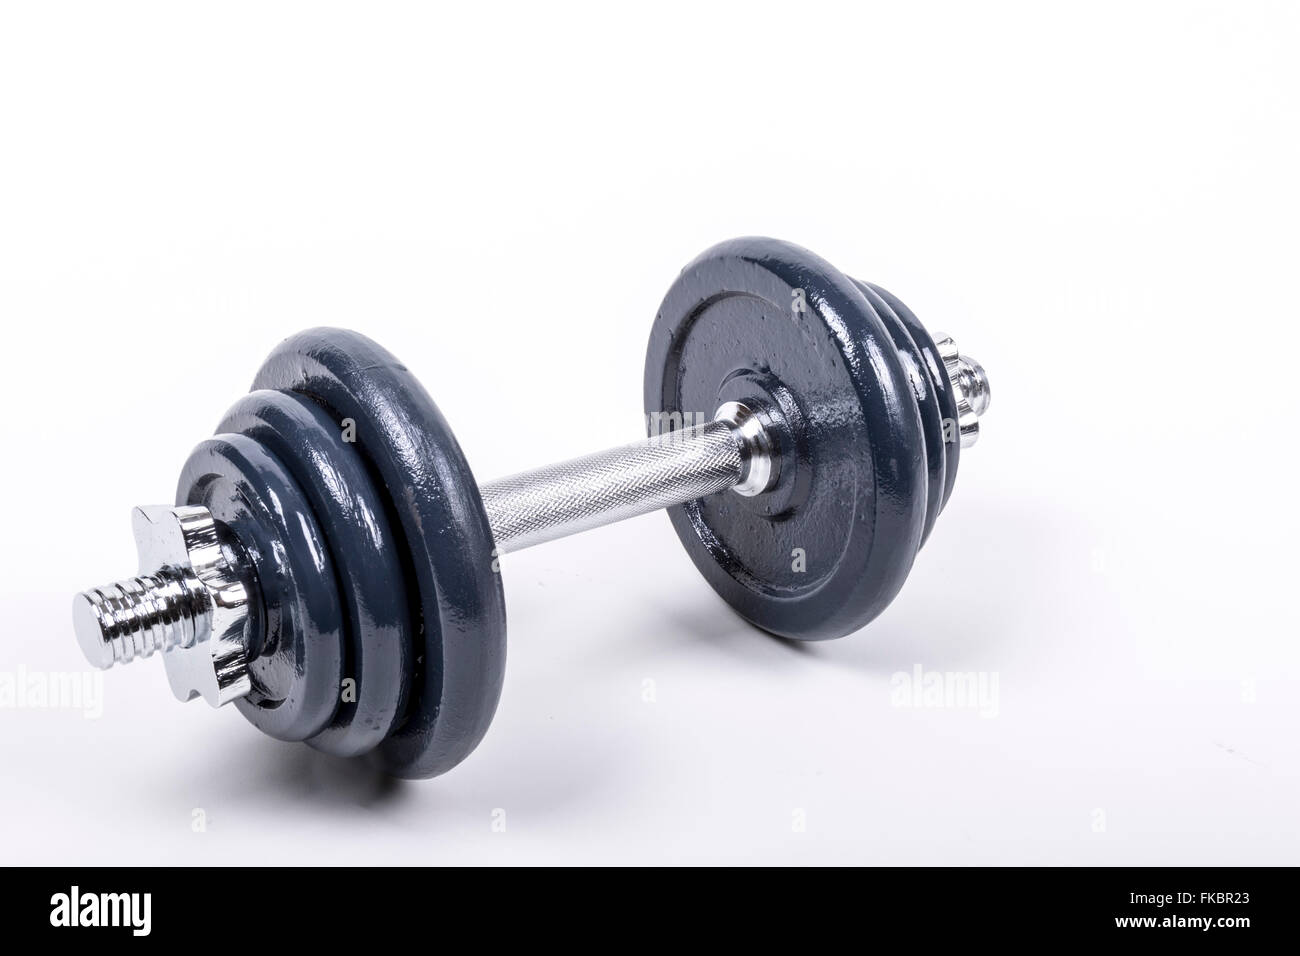 Weights for exercise Stock Photo